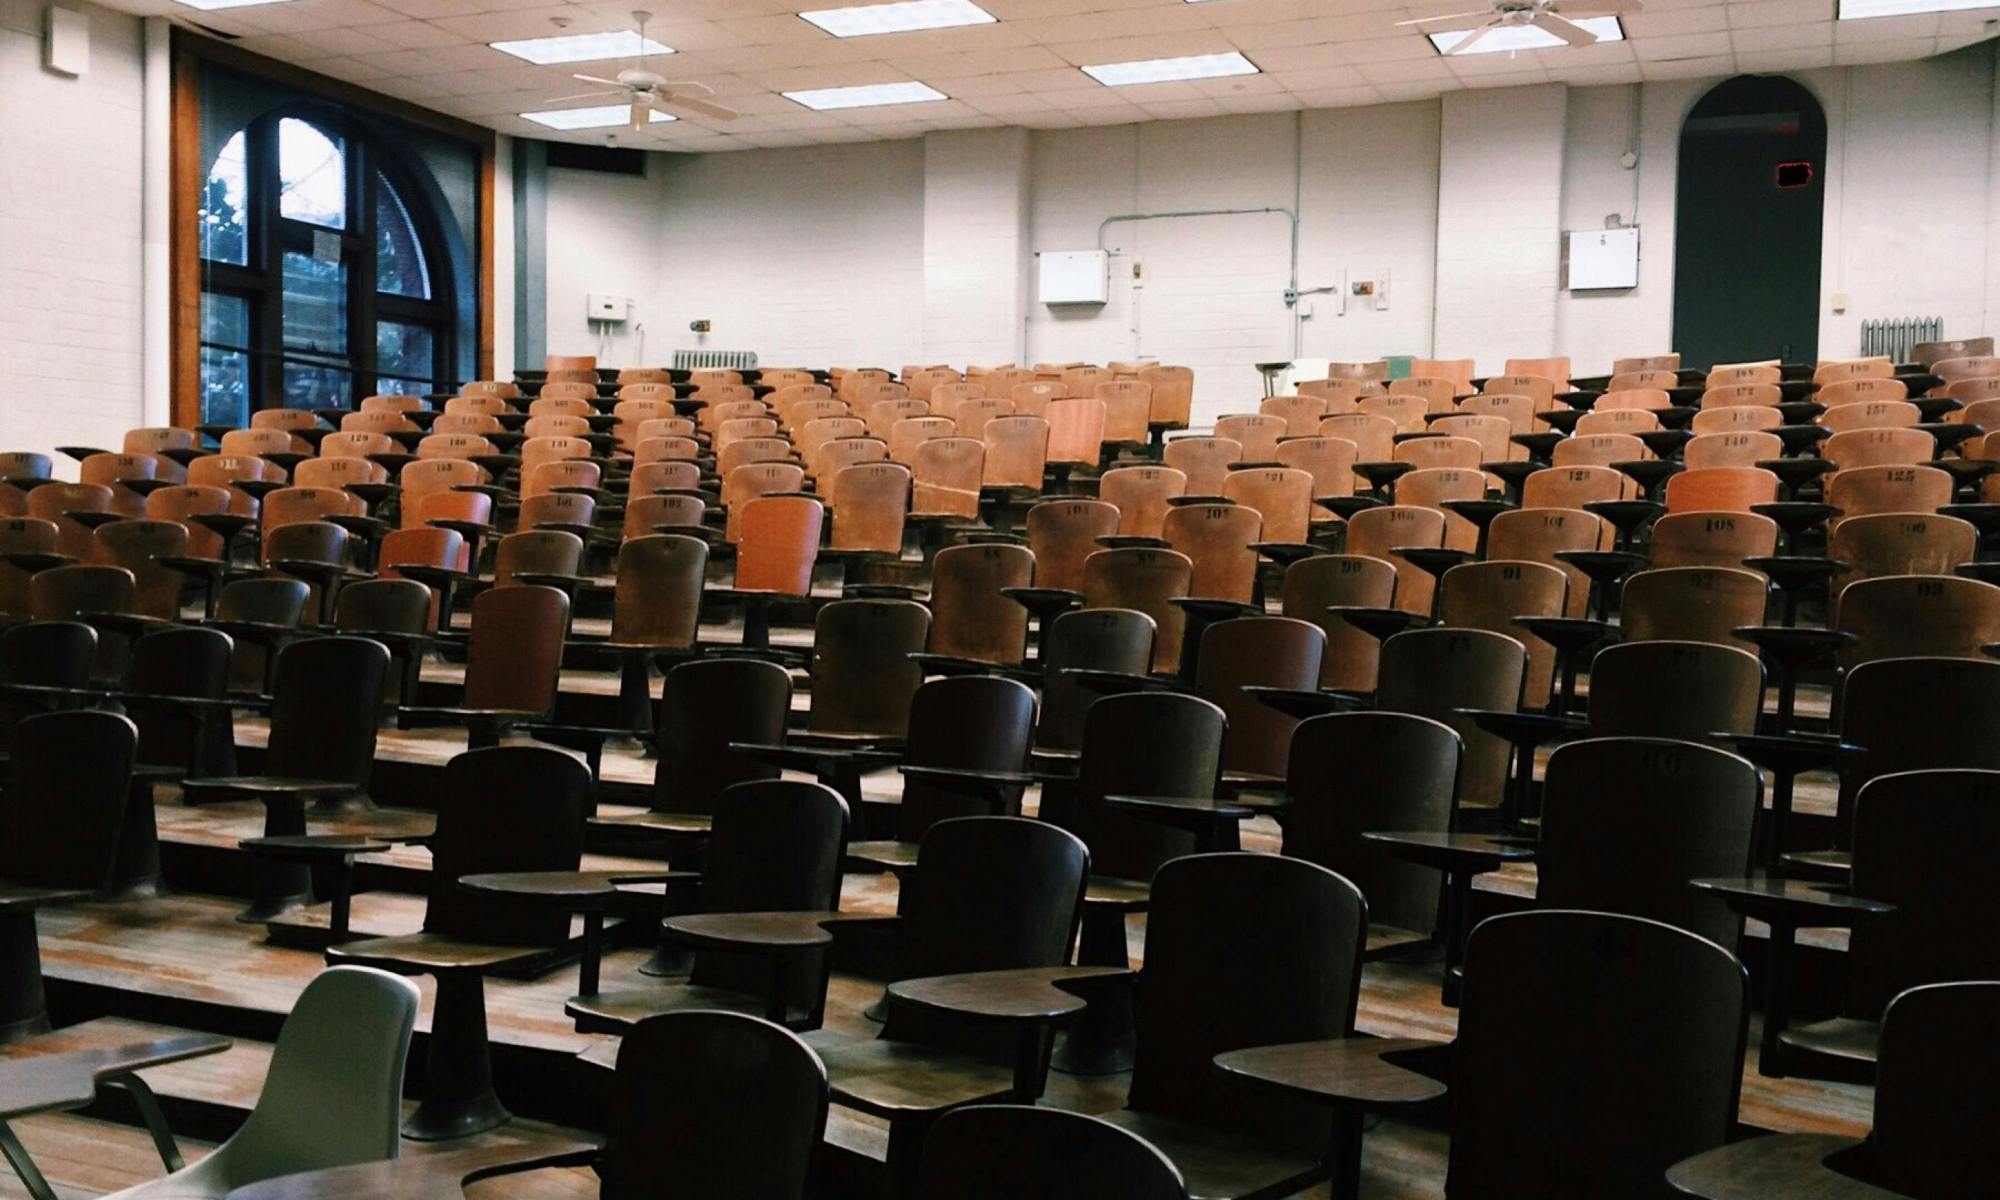 A room with lecture-style seating.